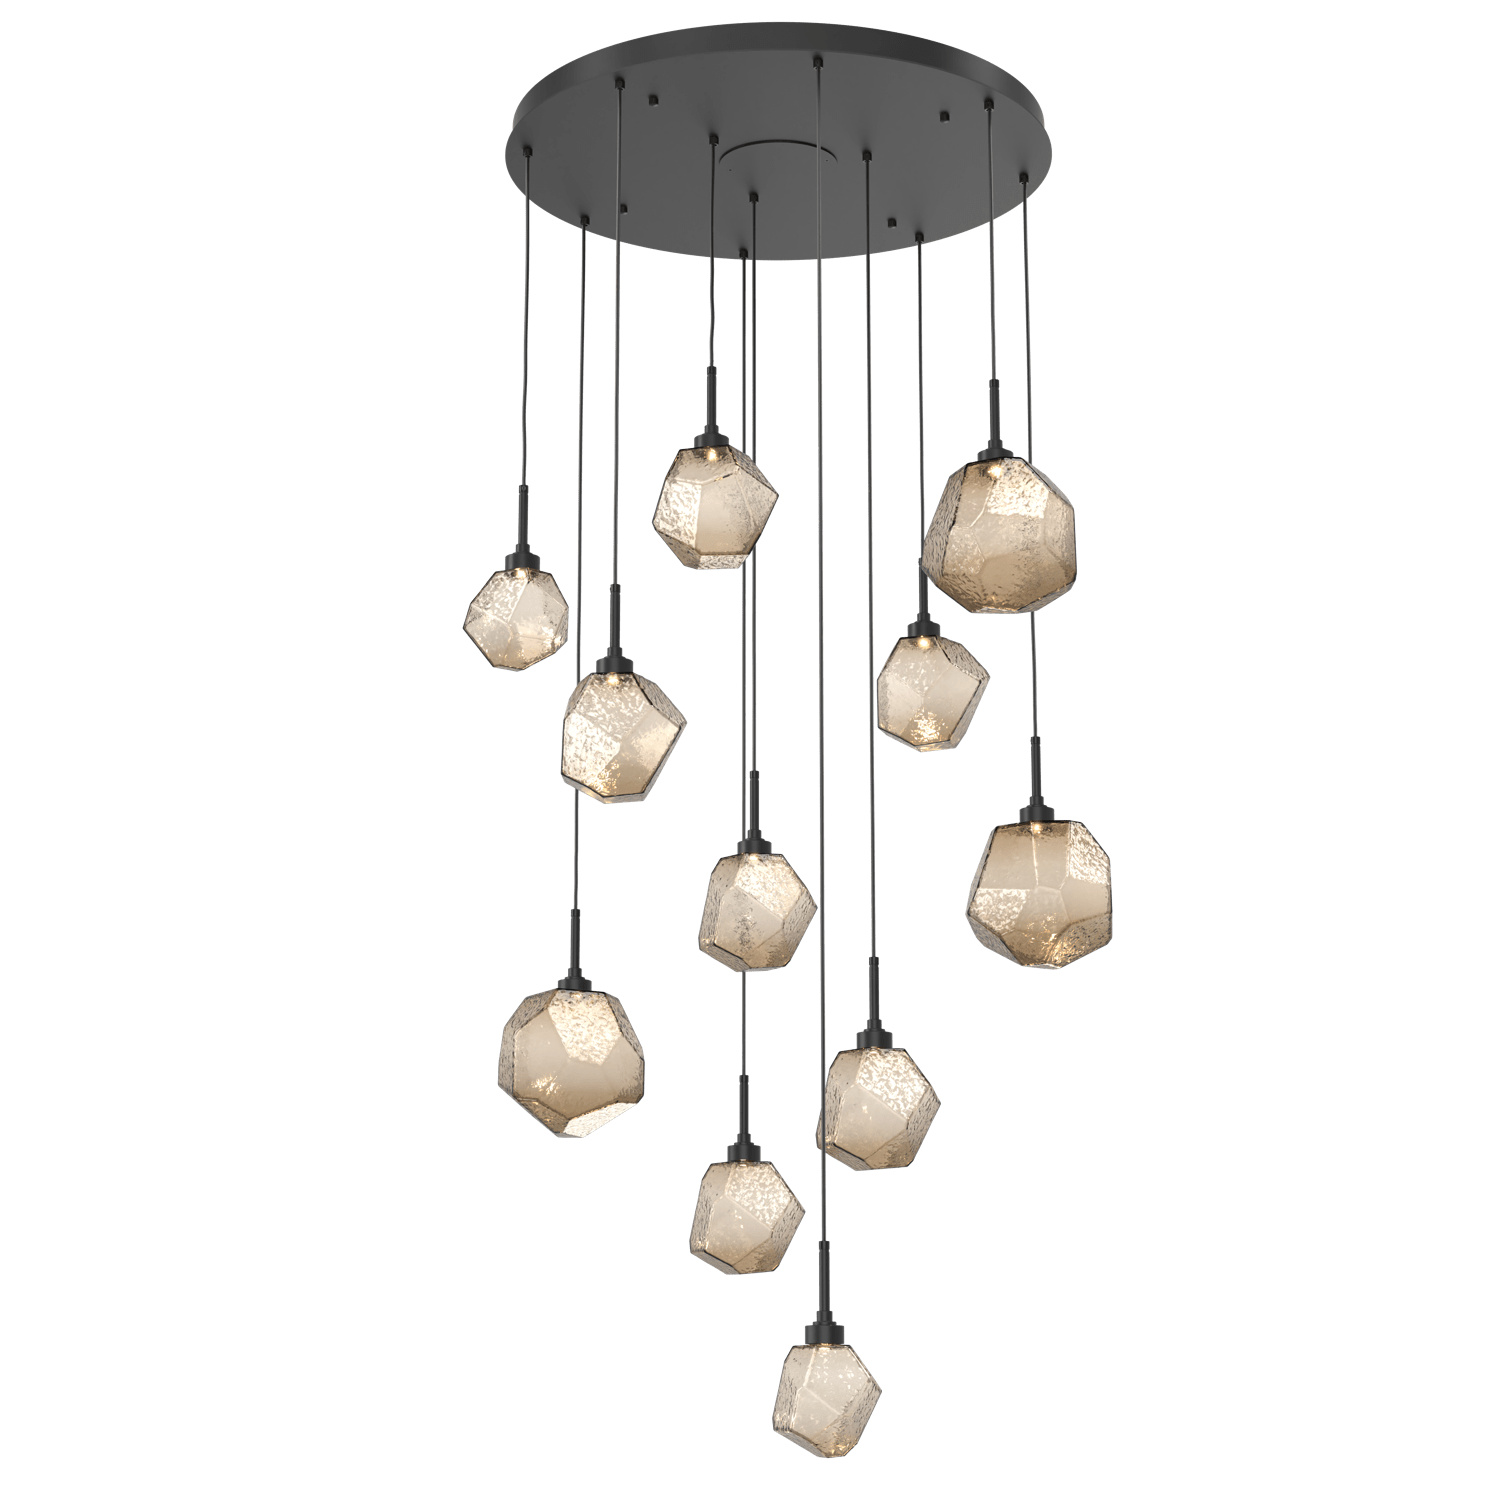 CHB0039-11-MB-B-Hammerton-Studio-Gem-11-light-round-pendant-chandelier-with-matte-black-finish-and-bronze-blown-glass-shades-and-LED-lamping